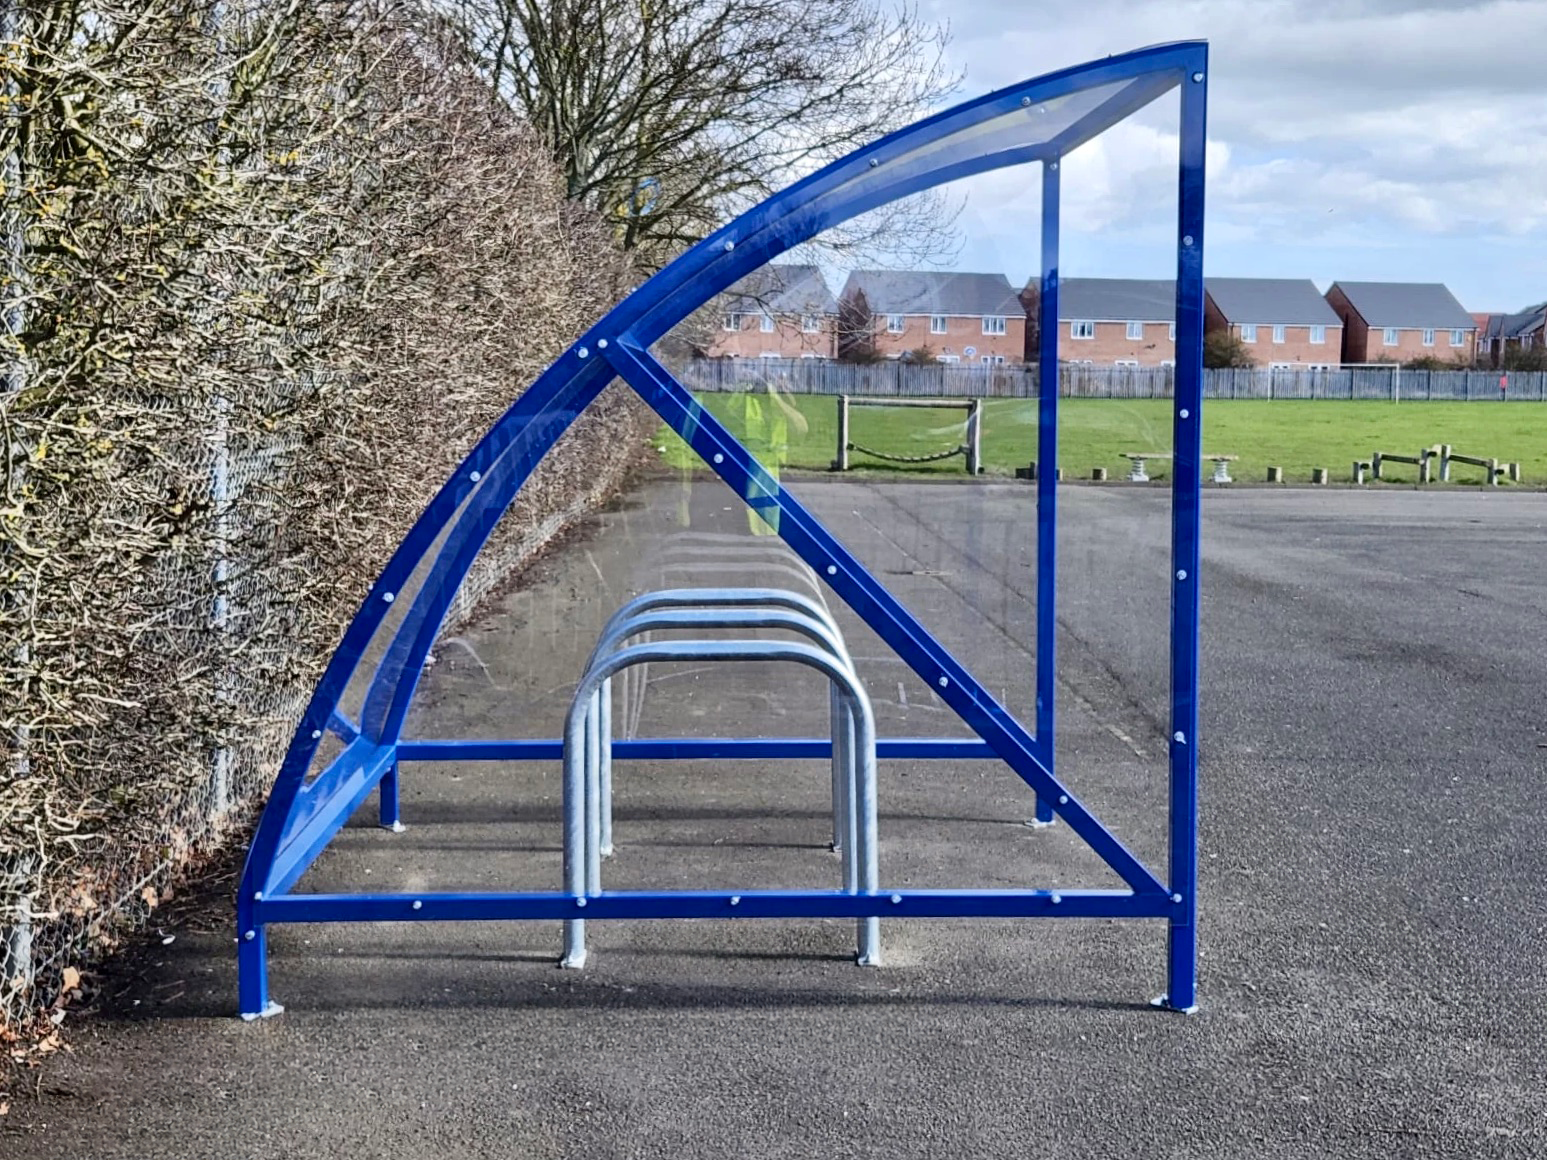 6-8 space original cycle shelter with galvanised Sheffield stands